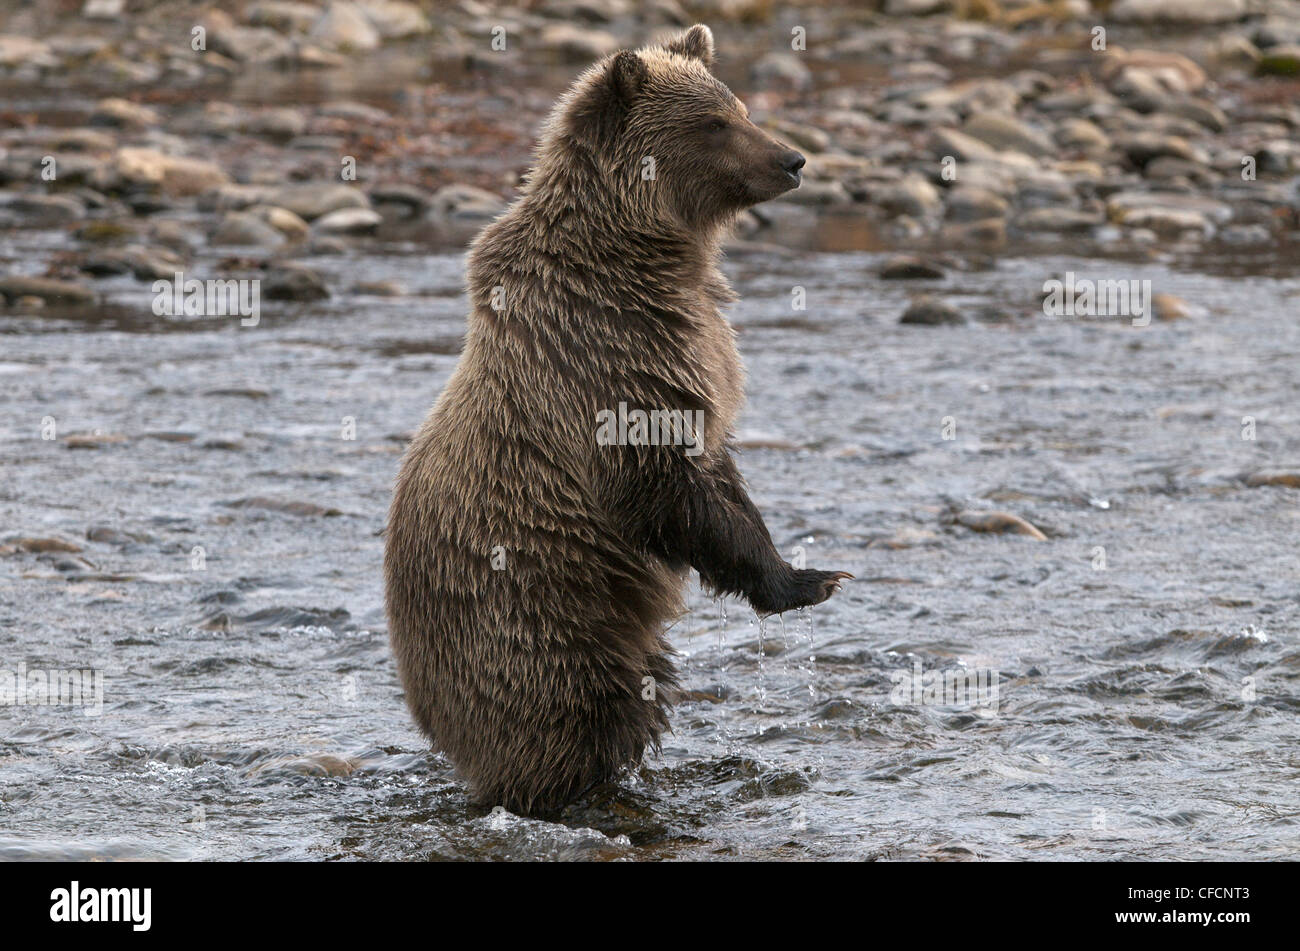 Grizzly Bear Standing-2nd Year Cub Ursus arctos Stock Photo